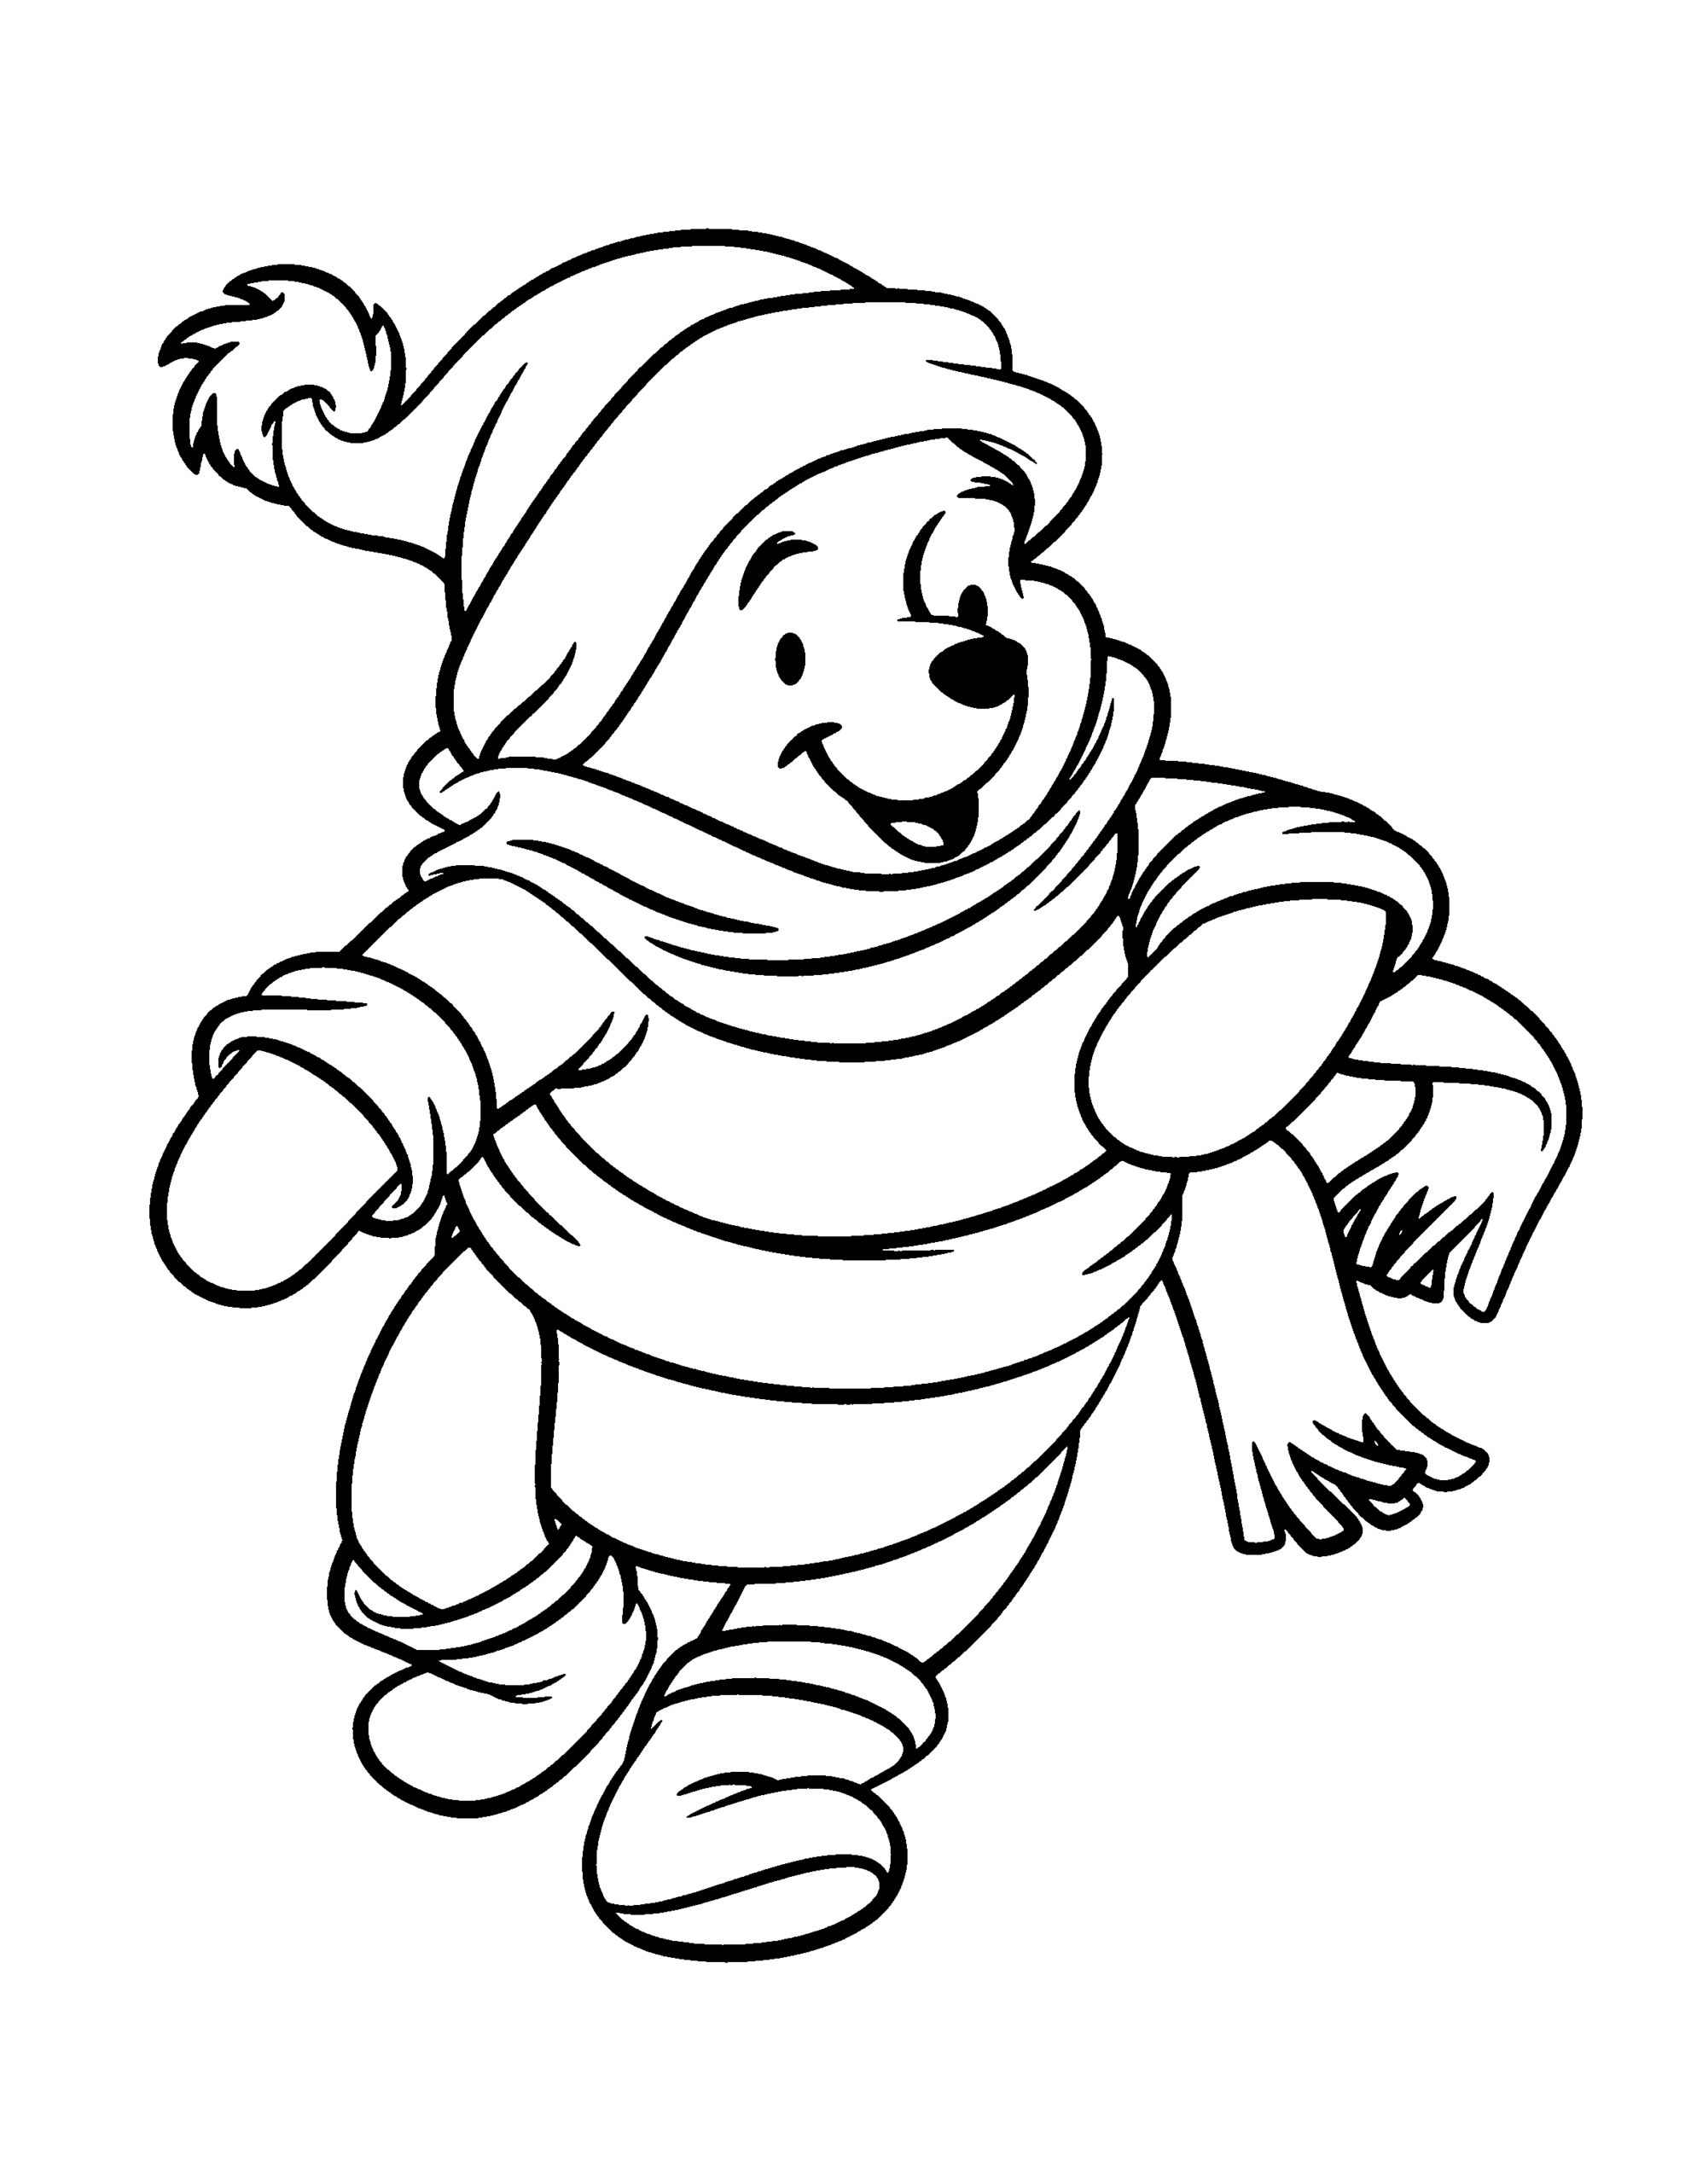 Winnie the Pooh Coloring Pages Cartoons winnie the pooh 77 Printable 2020 7196 Coloring4free